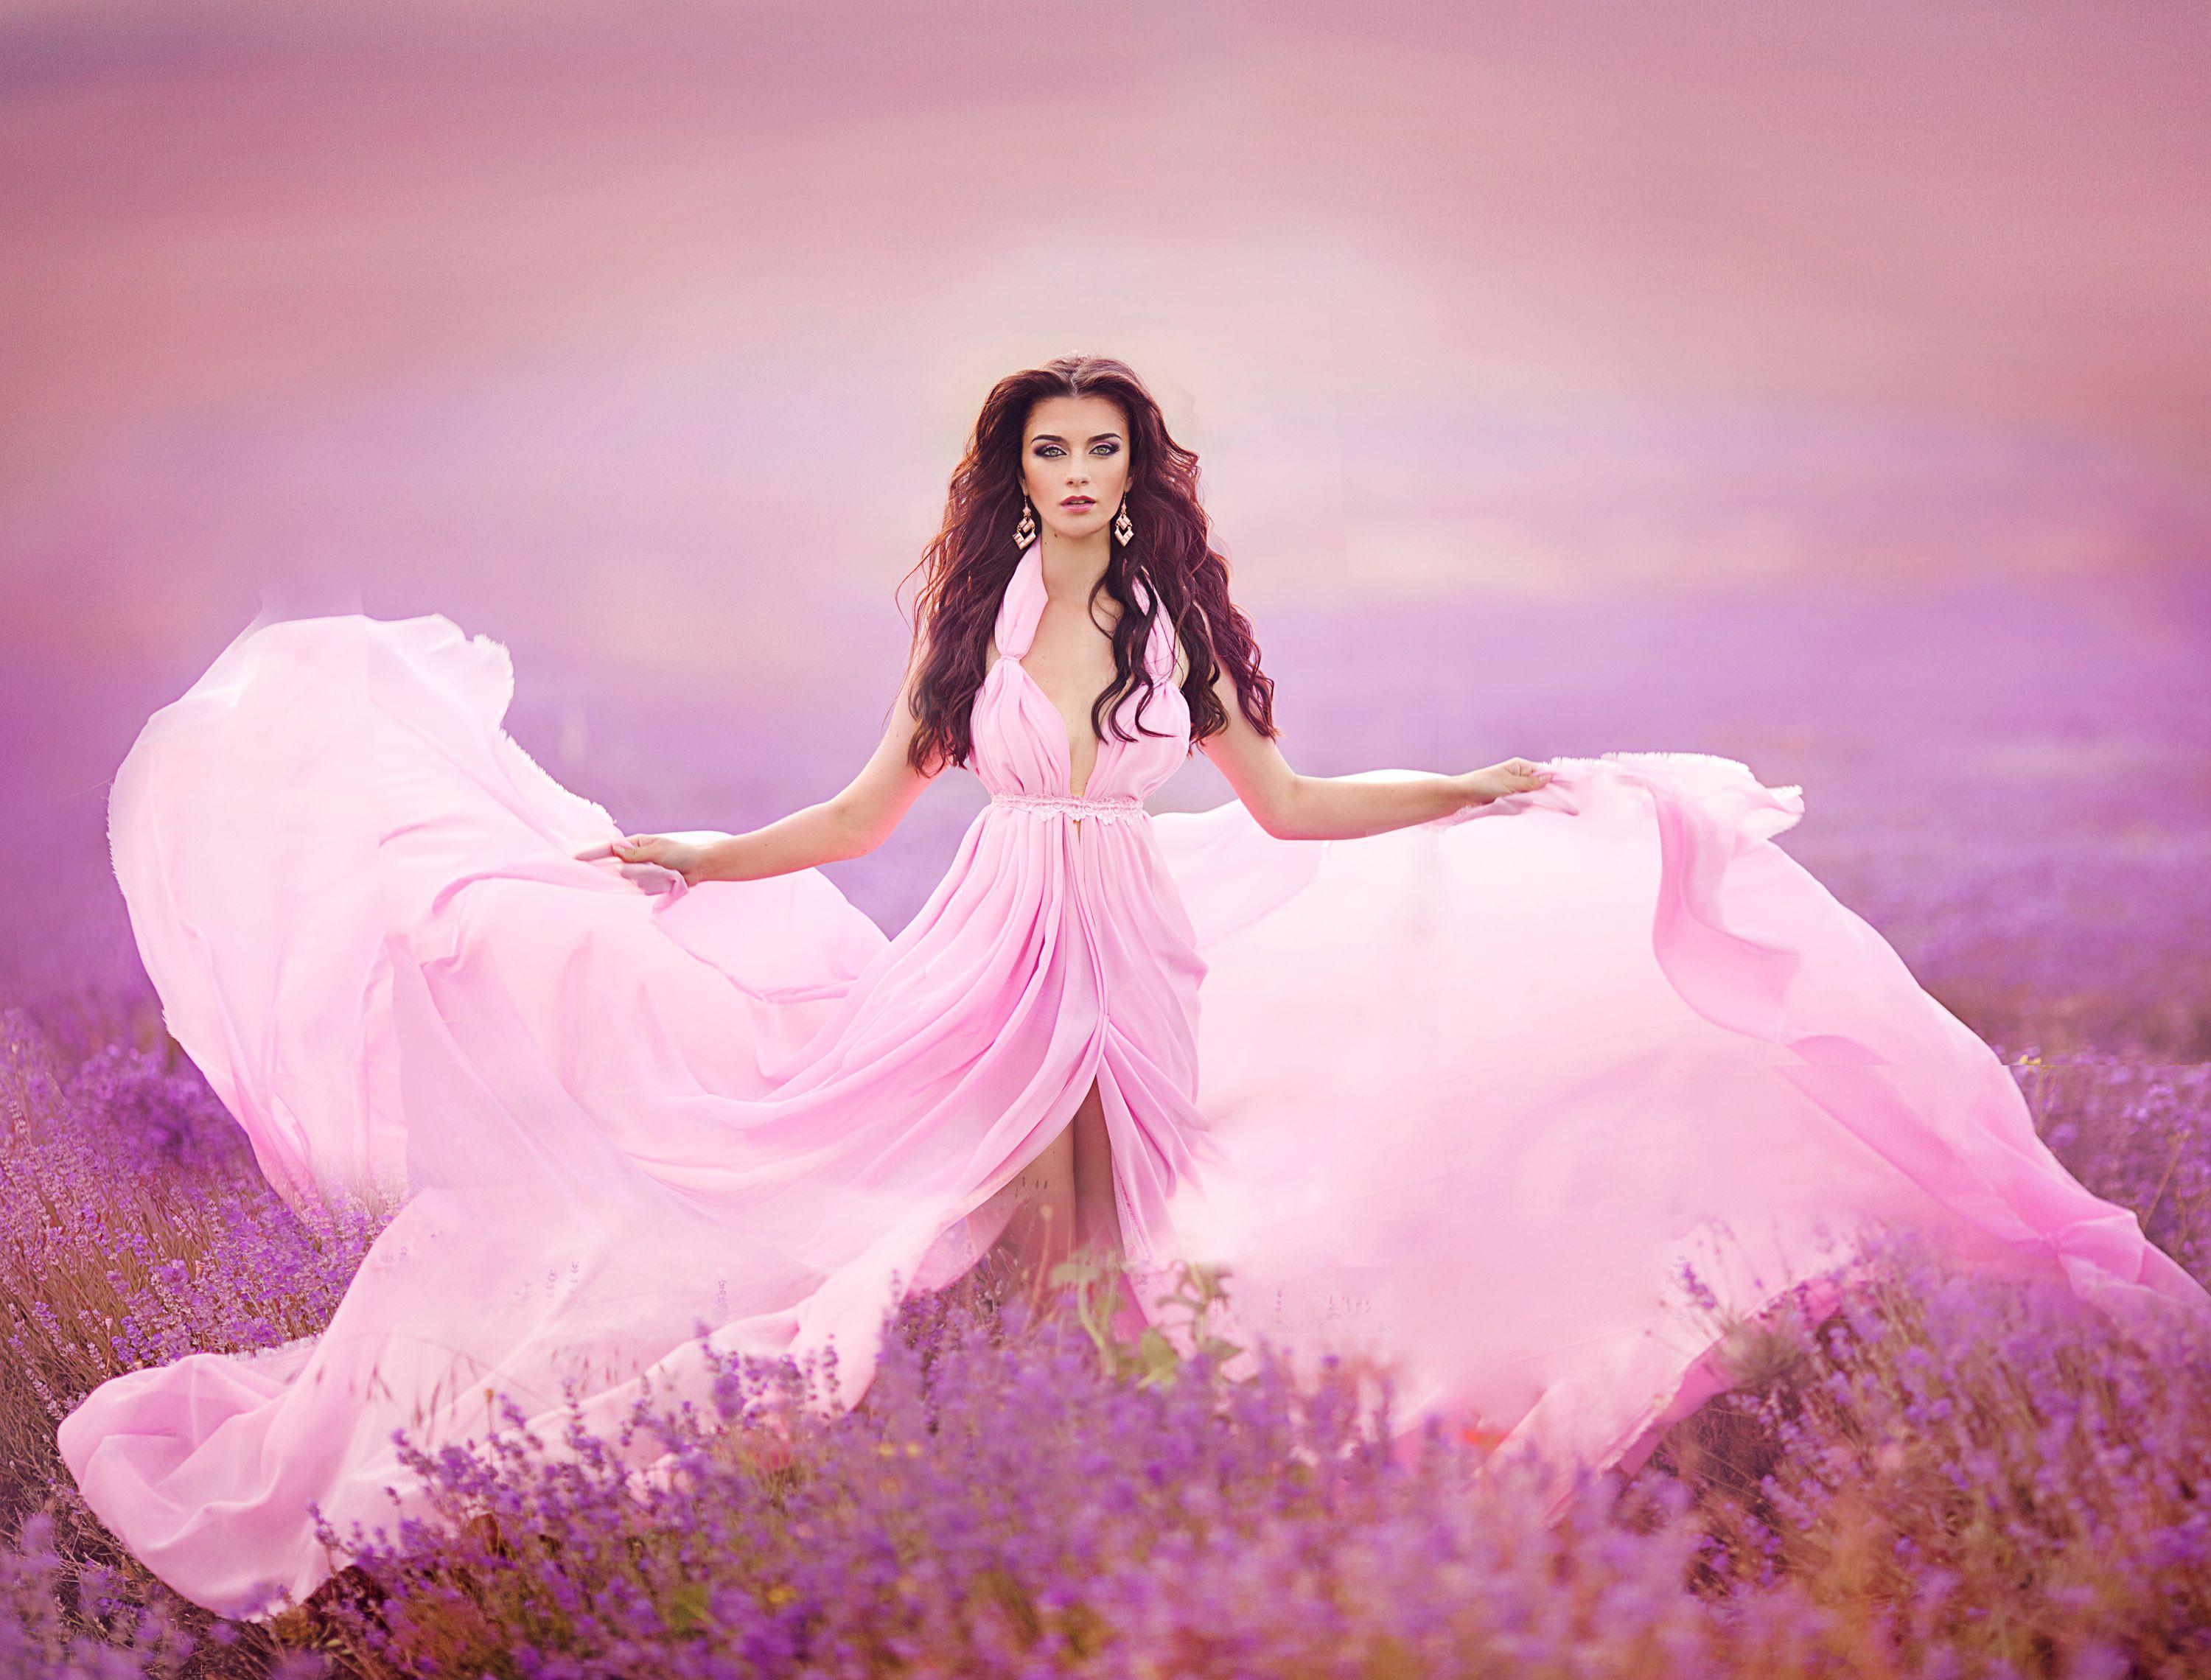 Girl with Pink Gown in Lavender Field Full HD Wallpaper